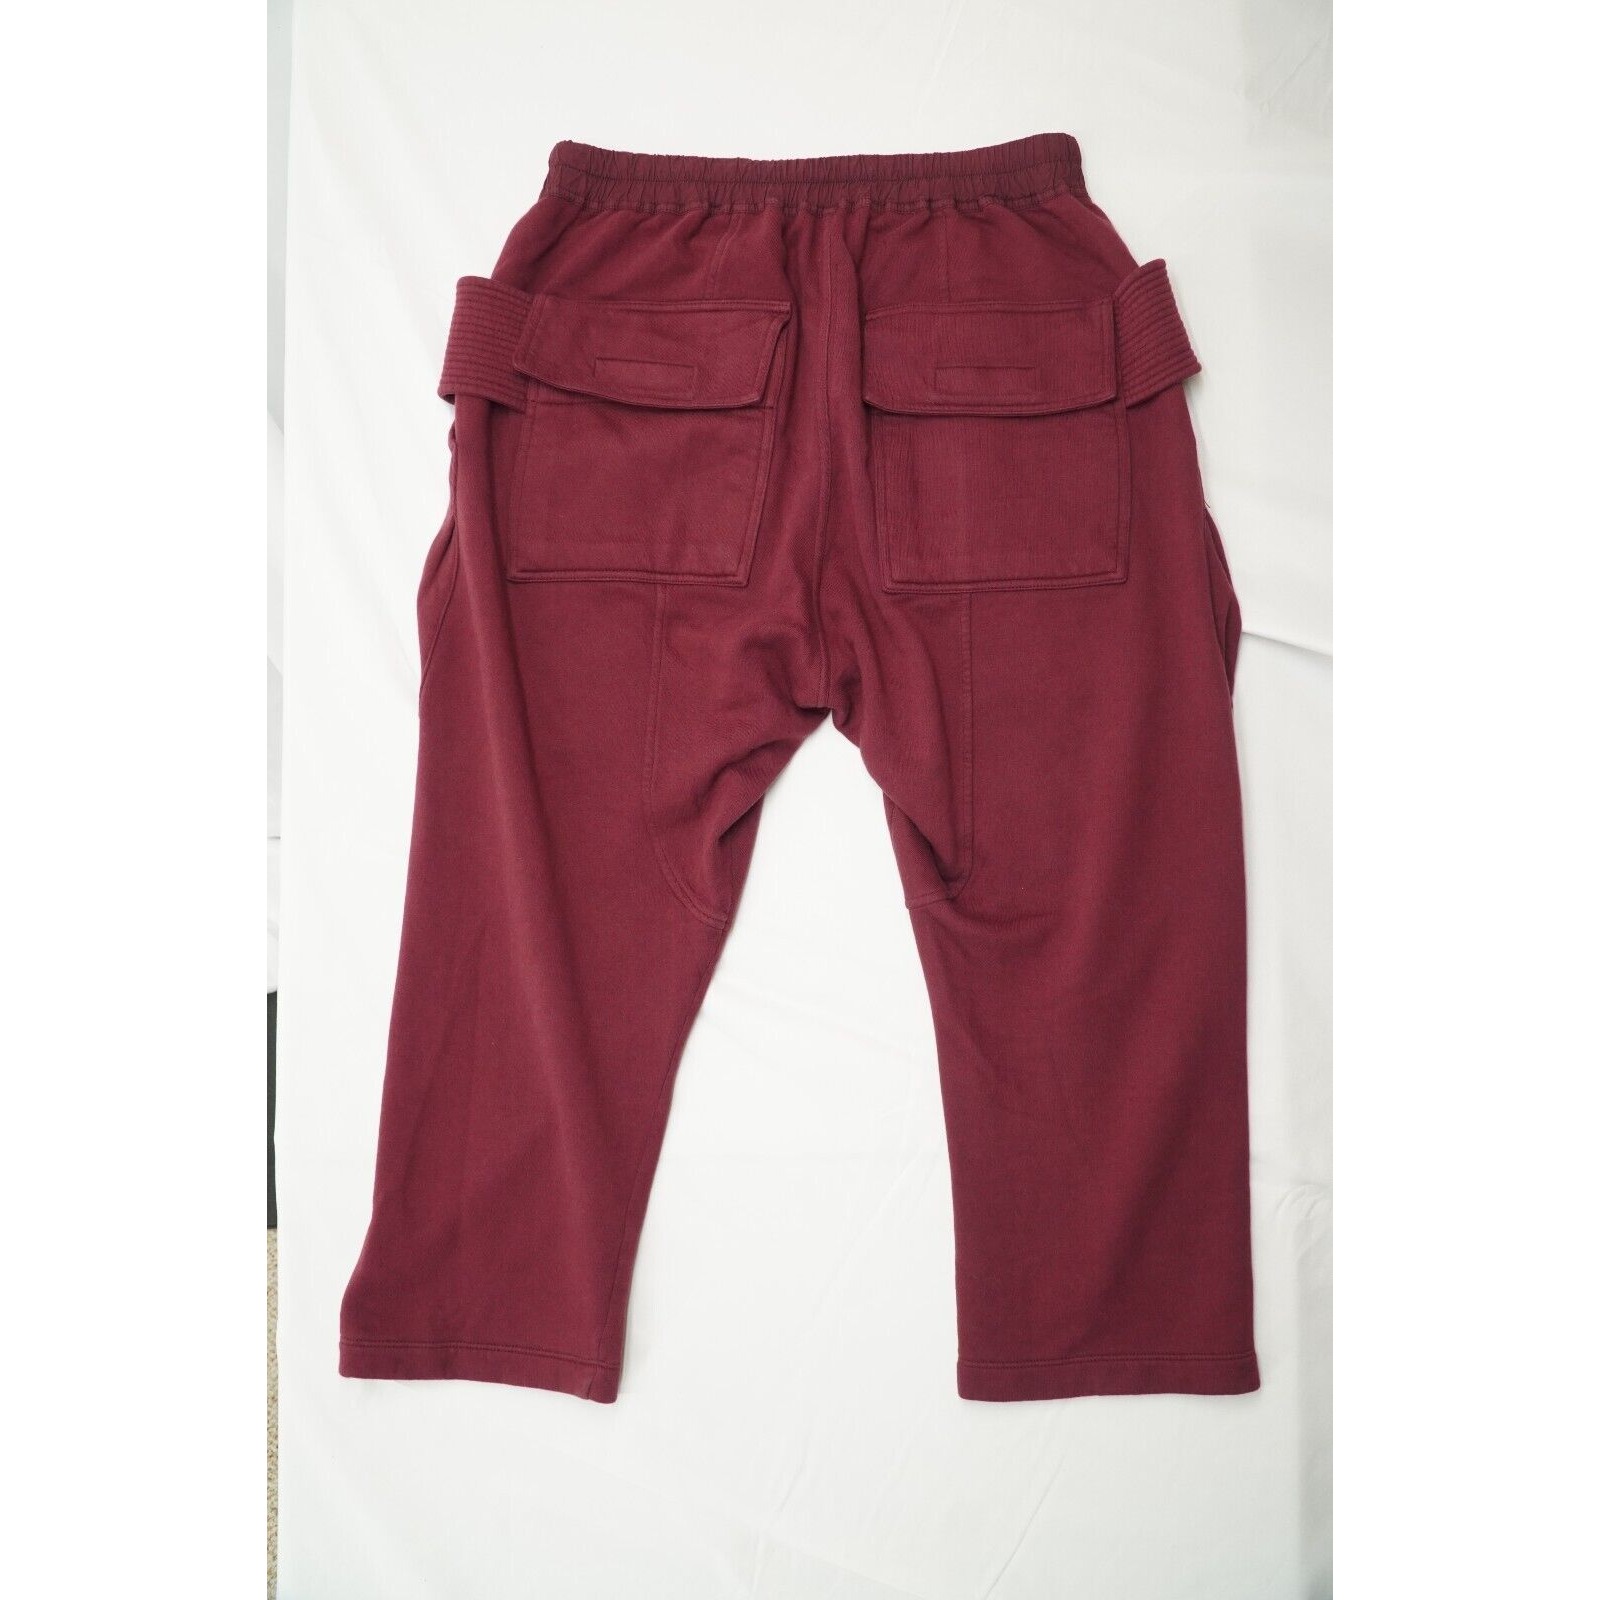 Rick Creatch Cargo Cropped Sweatpant Bruise Red FW20 - 9